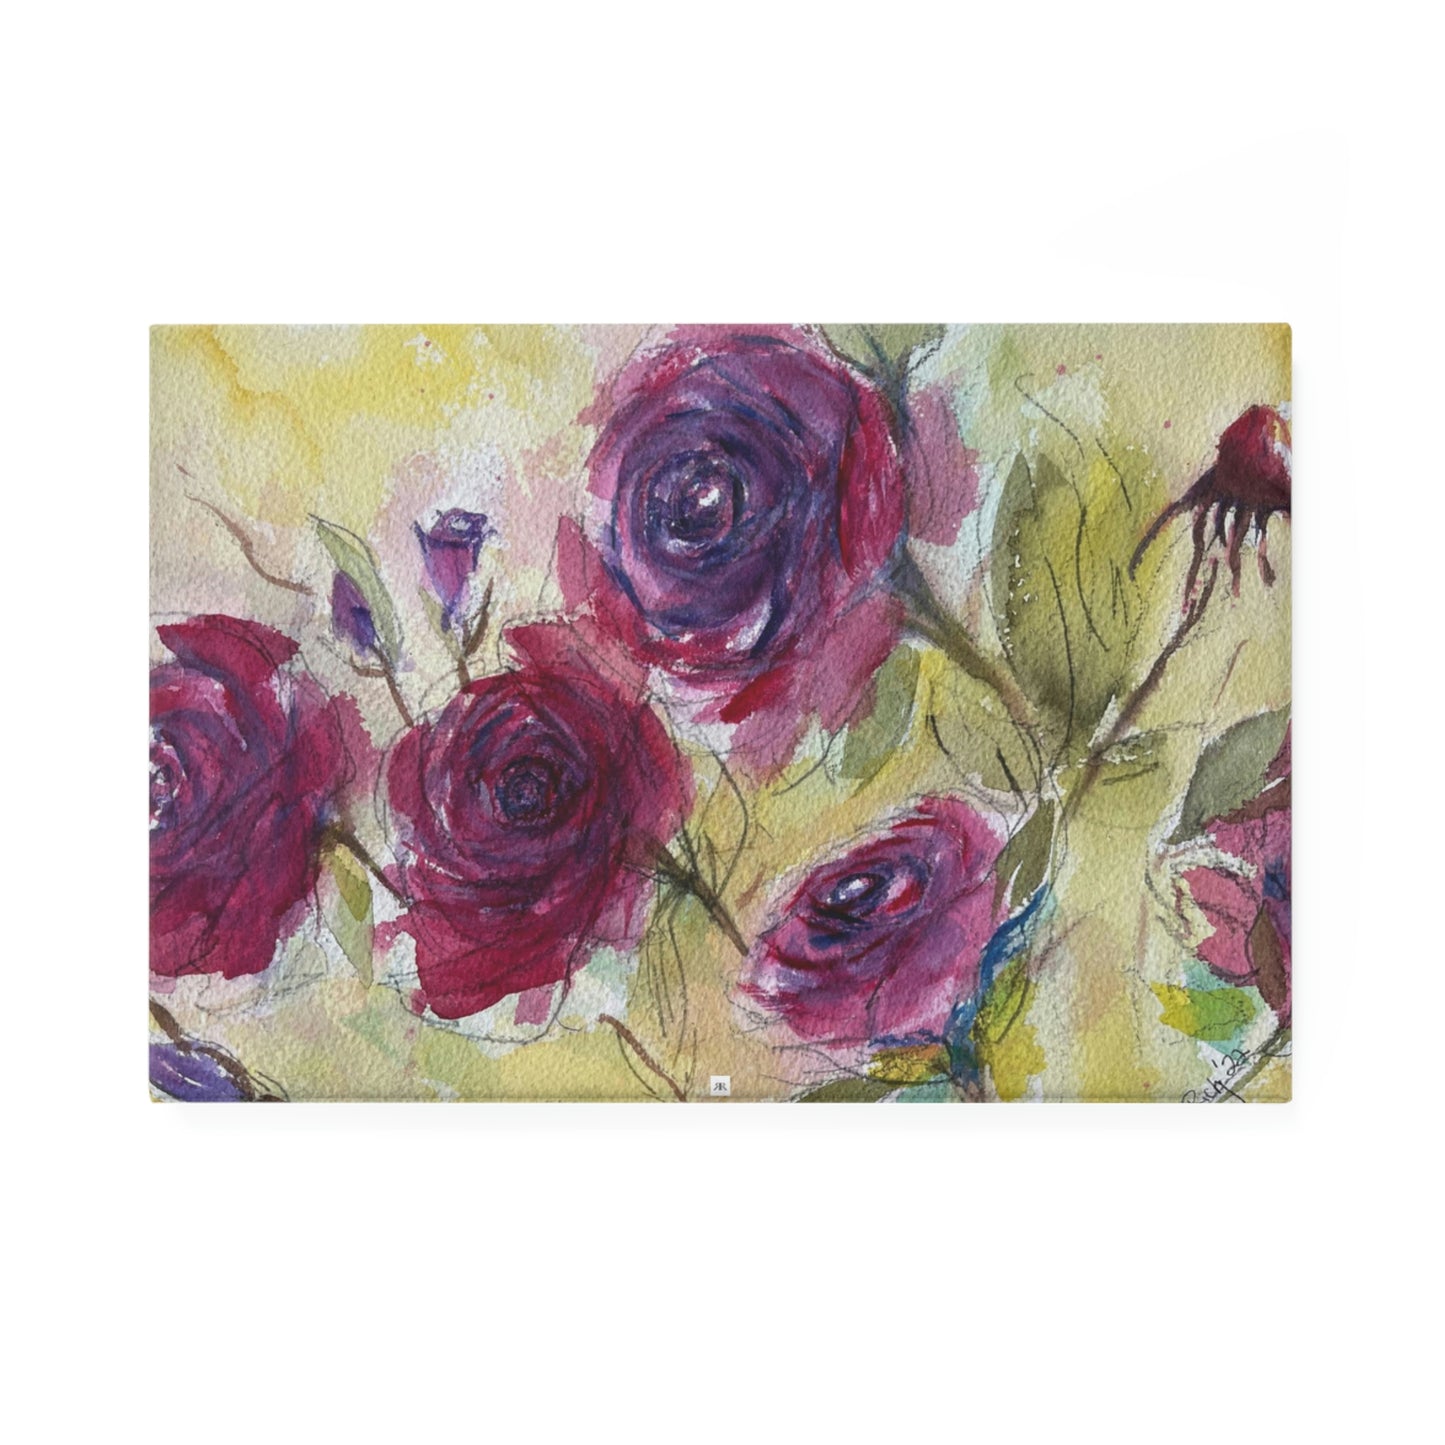 Aimant bouton avec roses rouges moelleuses, rectangle